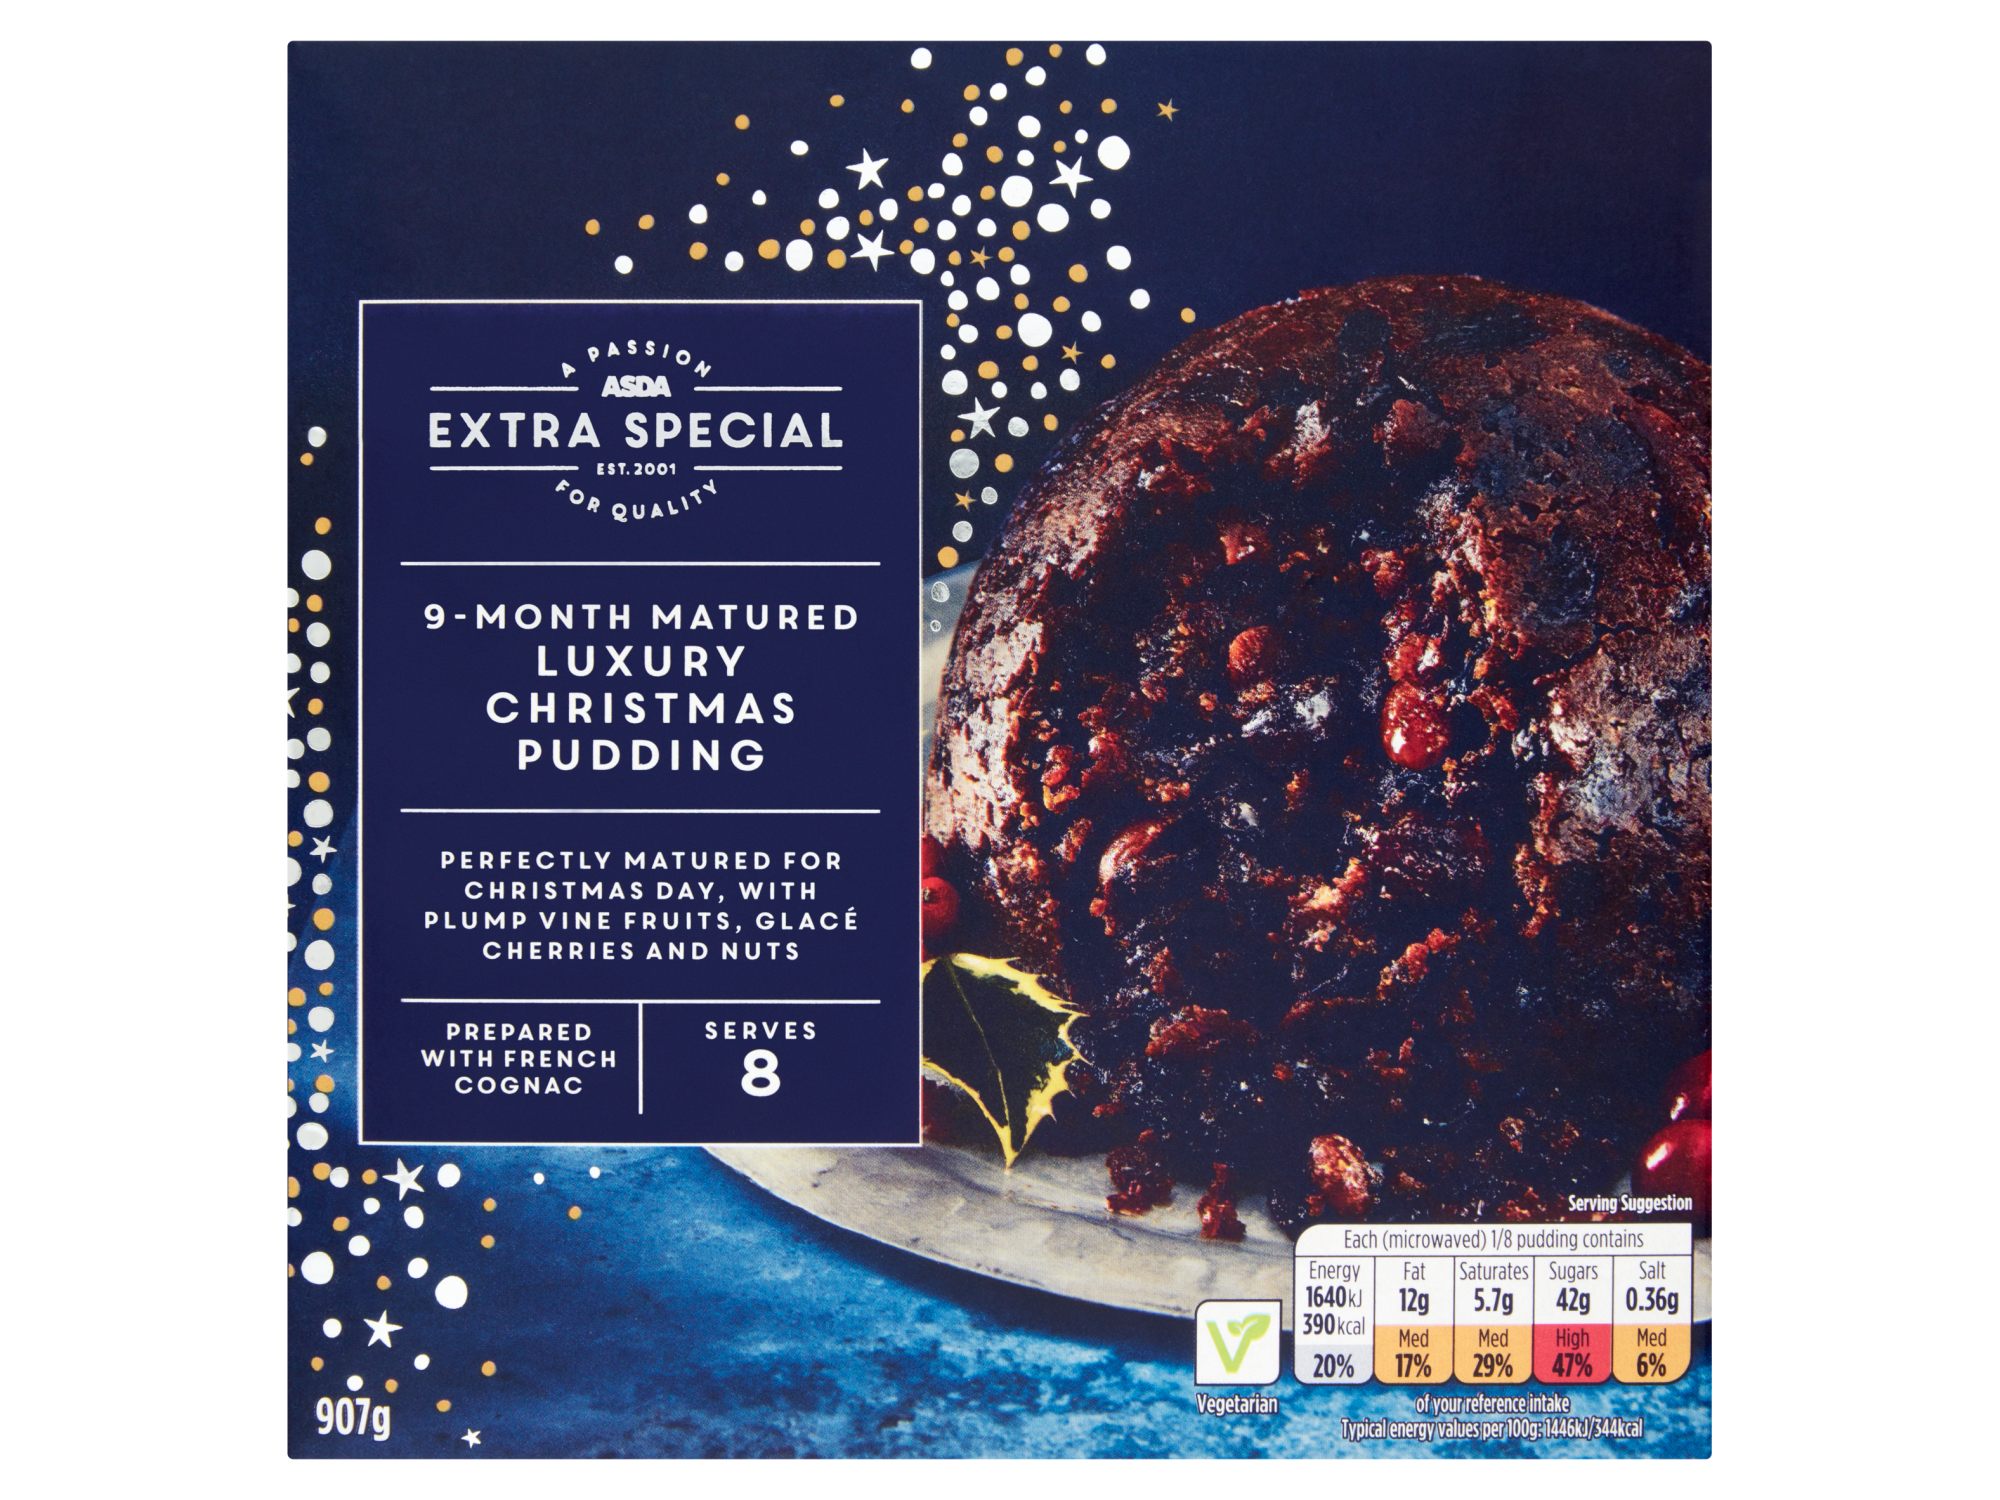 Asda Extra Special 9 - Month Matured Luxury IndyBest Christmas Pudding 907g.png